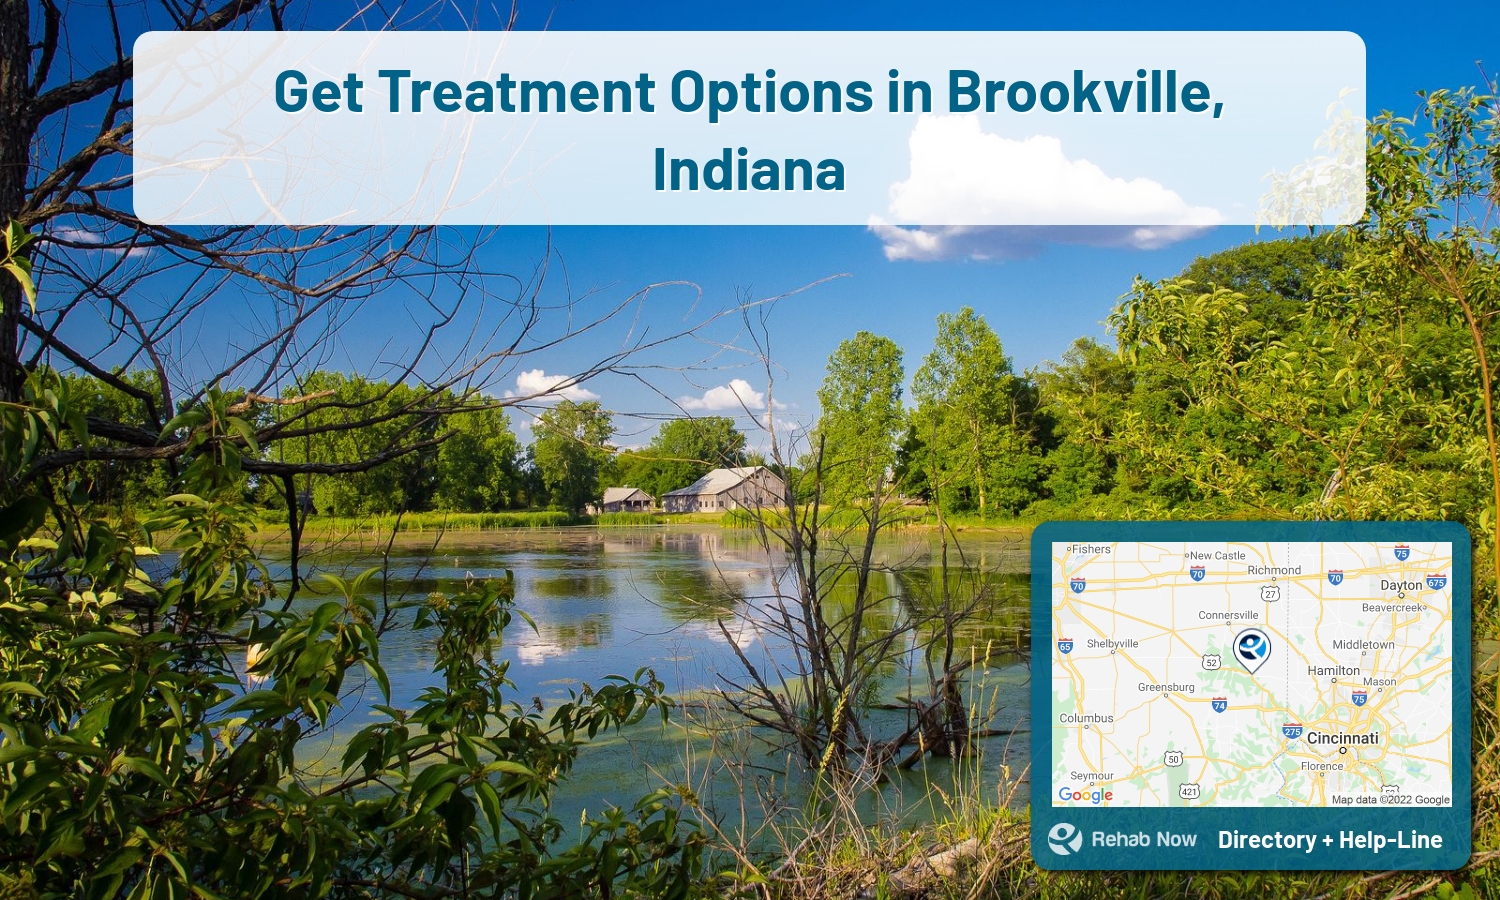 Let our expert counselors help find the best addiction treatment in Brookville, Indiana now with a free call to our hotline.